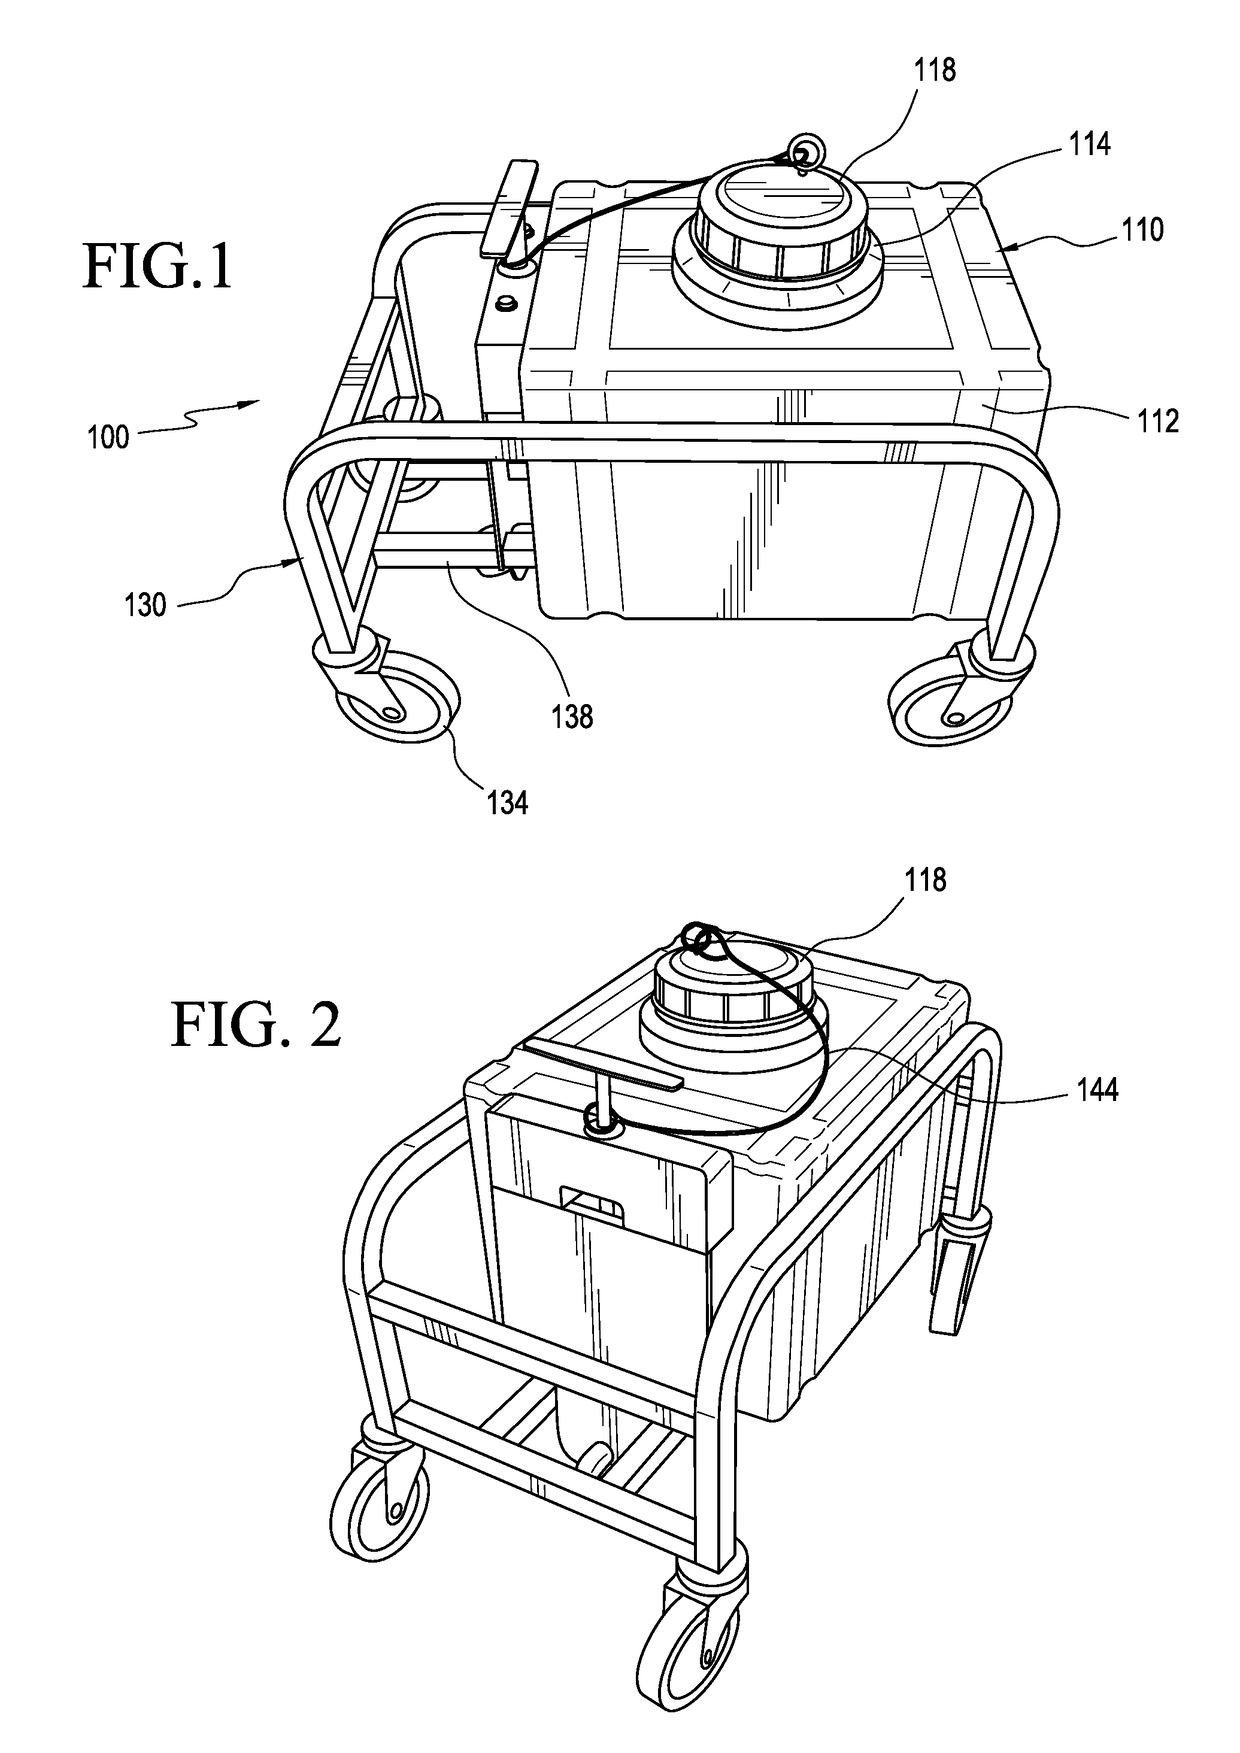 Liquid collection device that catches and transports, without spills, drain water from a piece of equipment, such as an ice table, and a system including the table and collection device